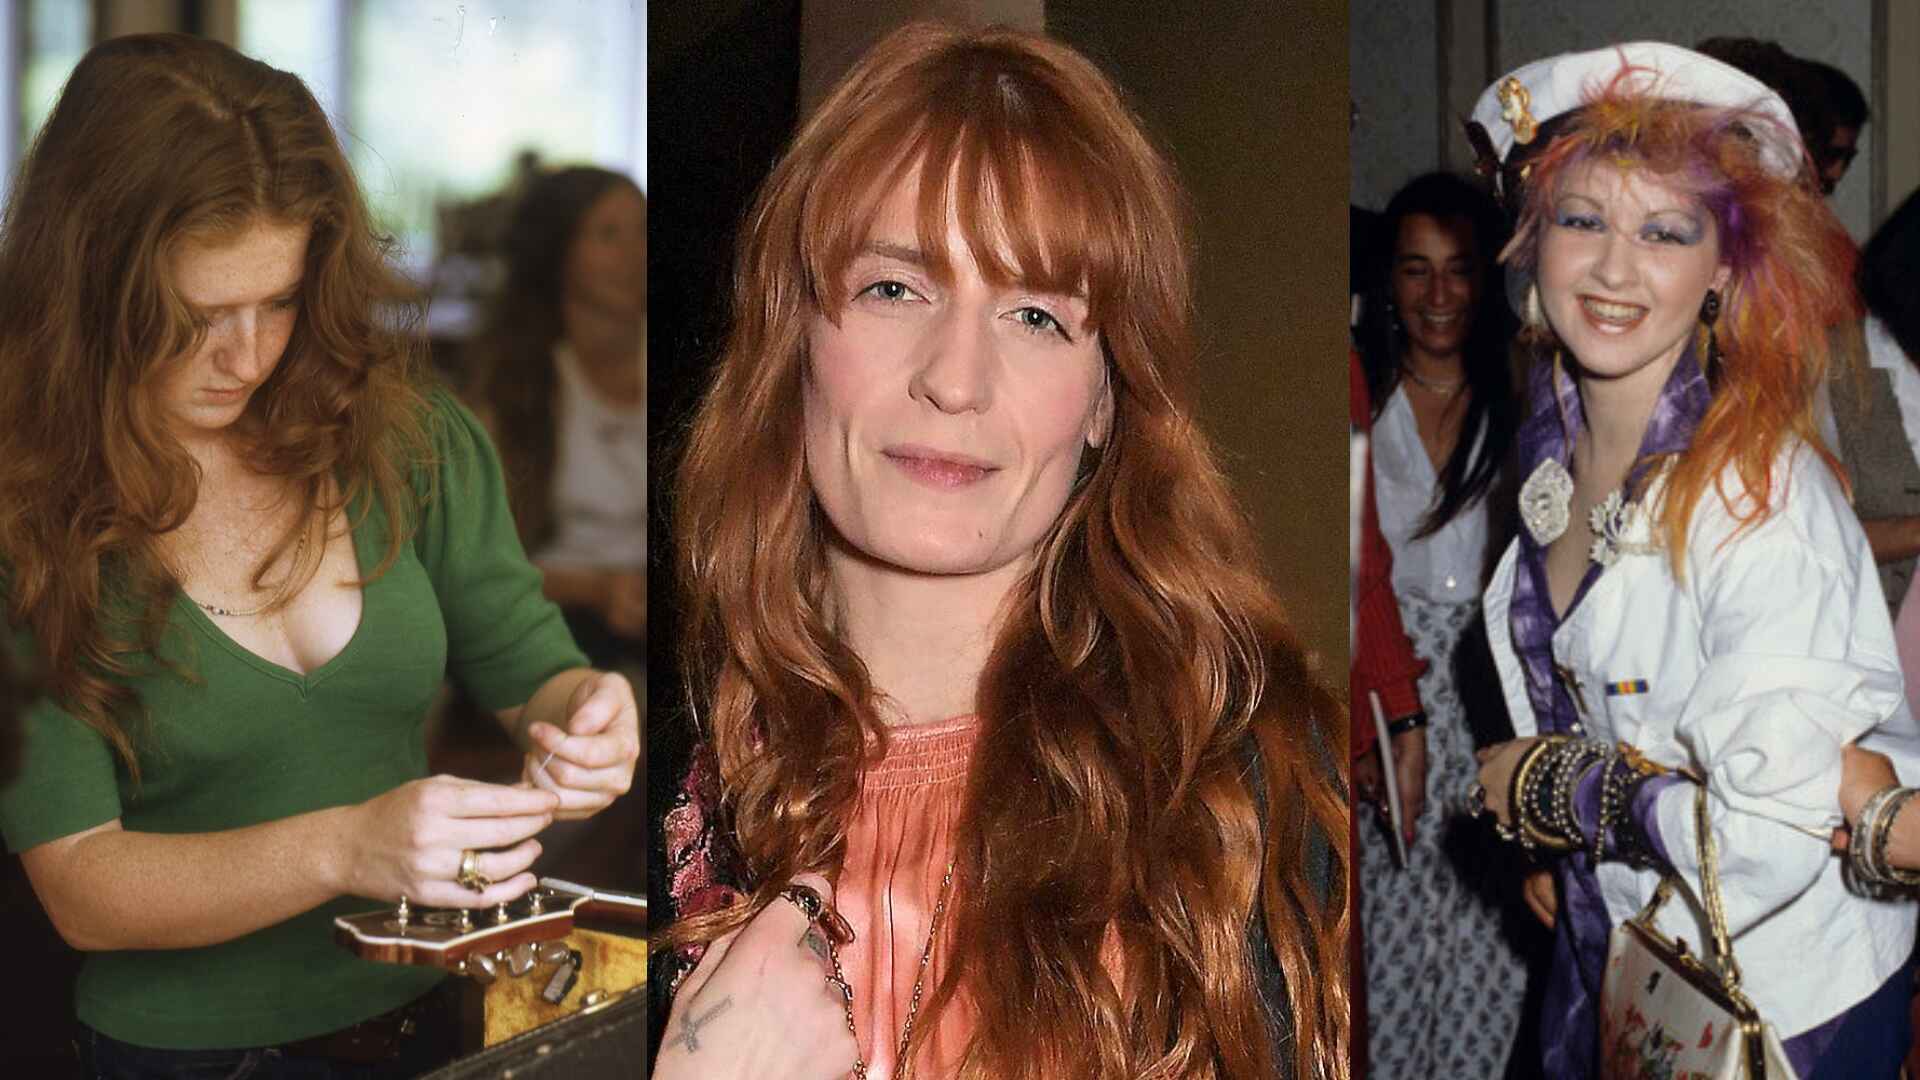 Red Head Female Singers - Top 5 Most Iconic Of All Time